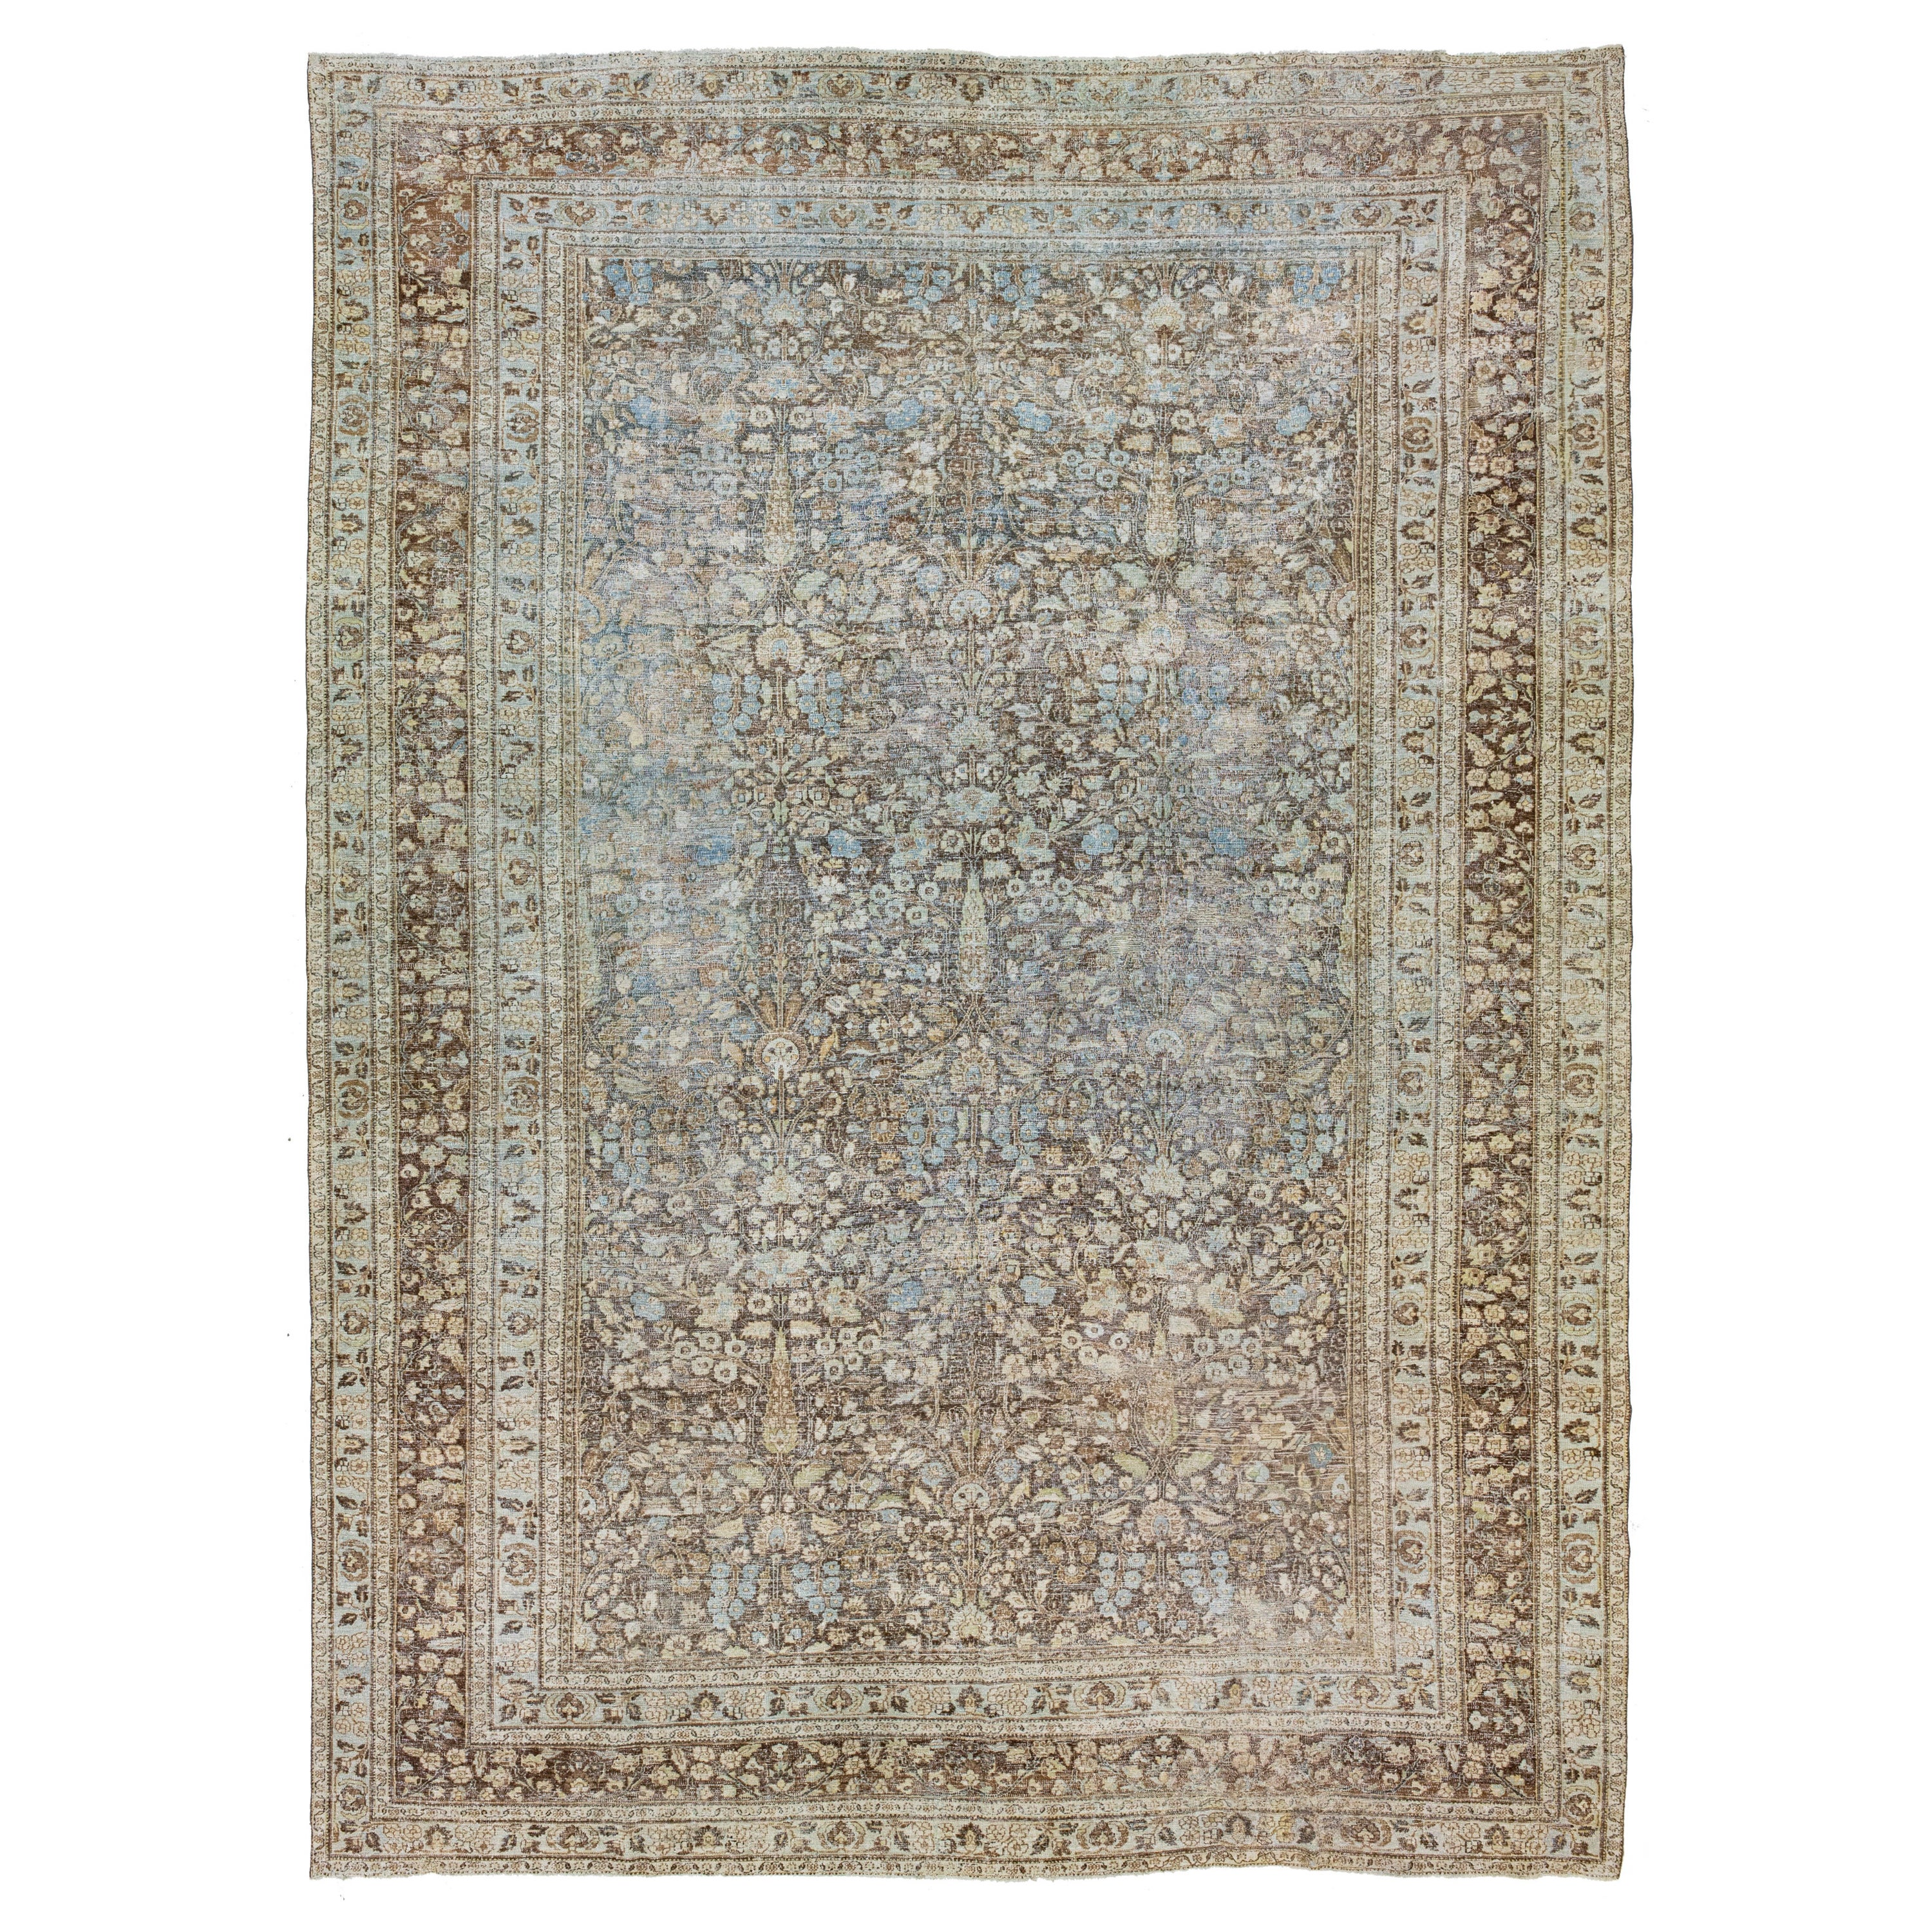 Oversize 1900's Persian Tabriz Wool Rug In Brown With Allover Floral Pattern For Sale